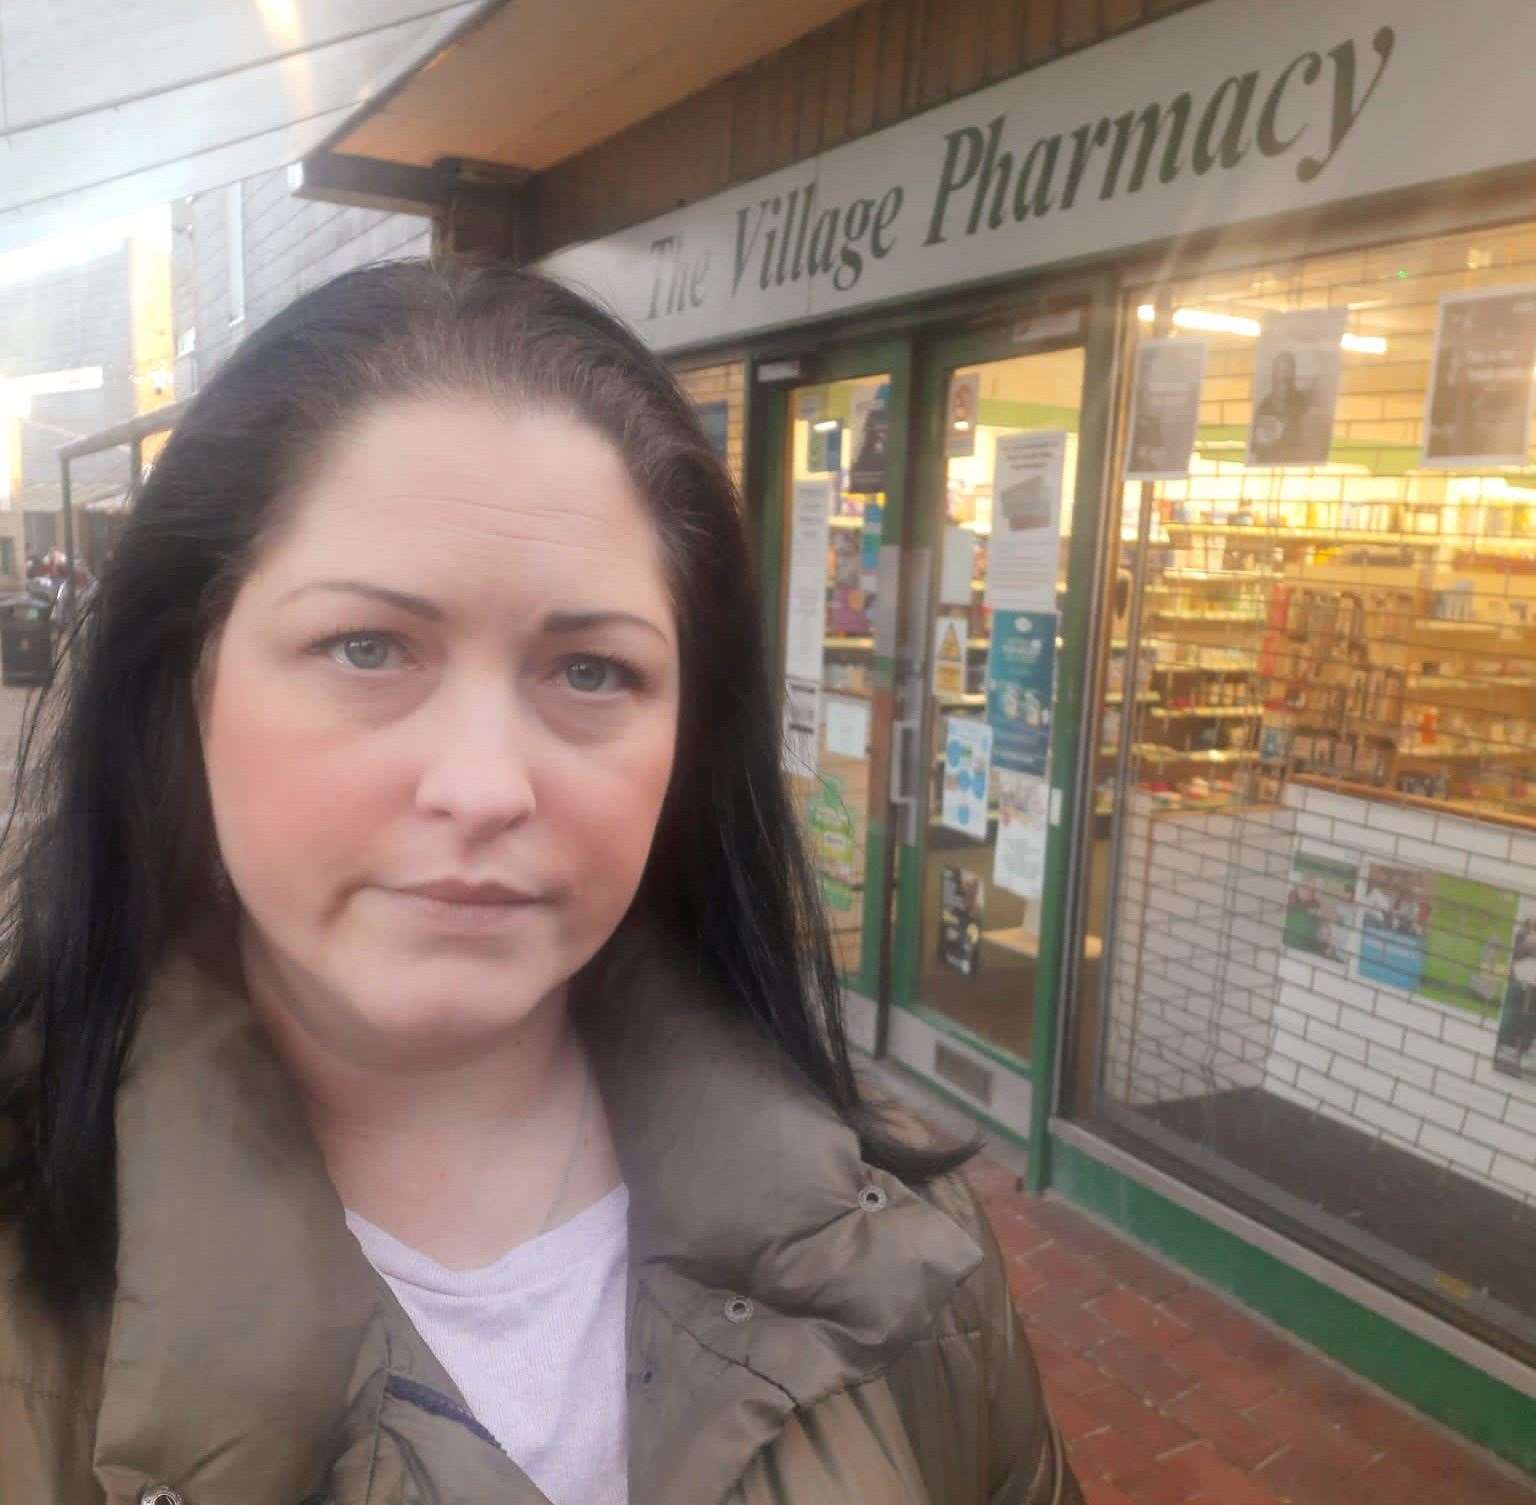 Cllr Laura Manston says the issue of the shops' leaking ceilings has gone on for too long. Photo credit: Laura Manston